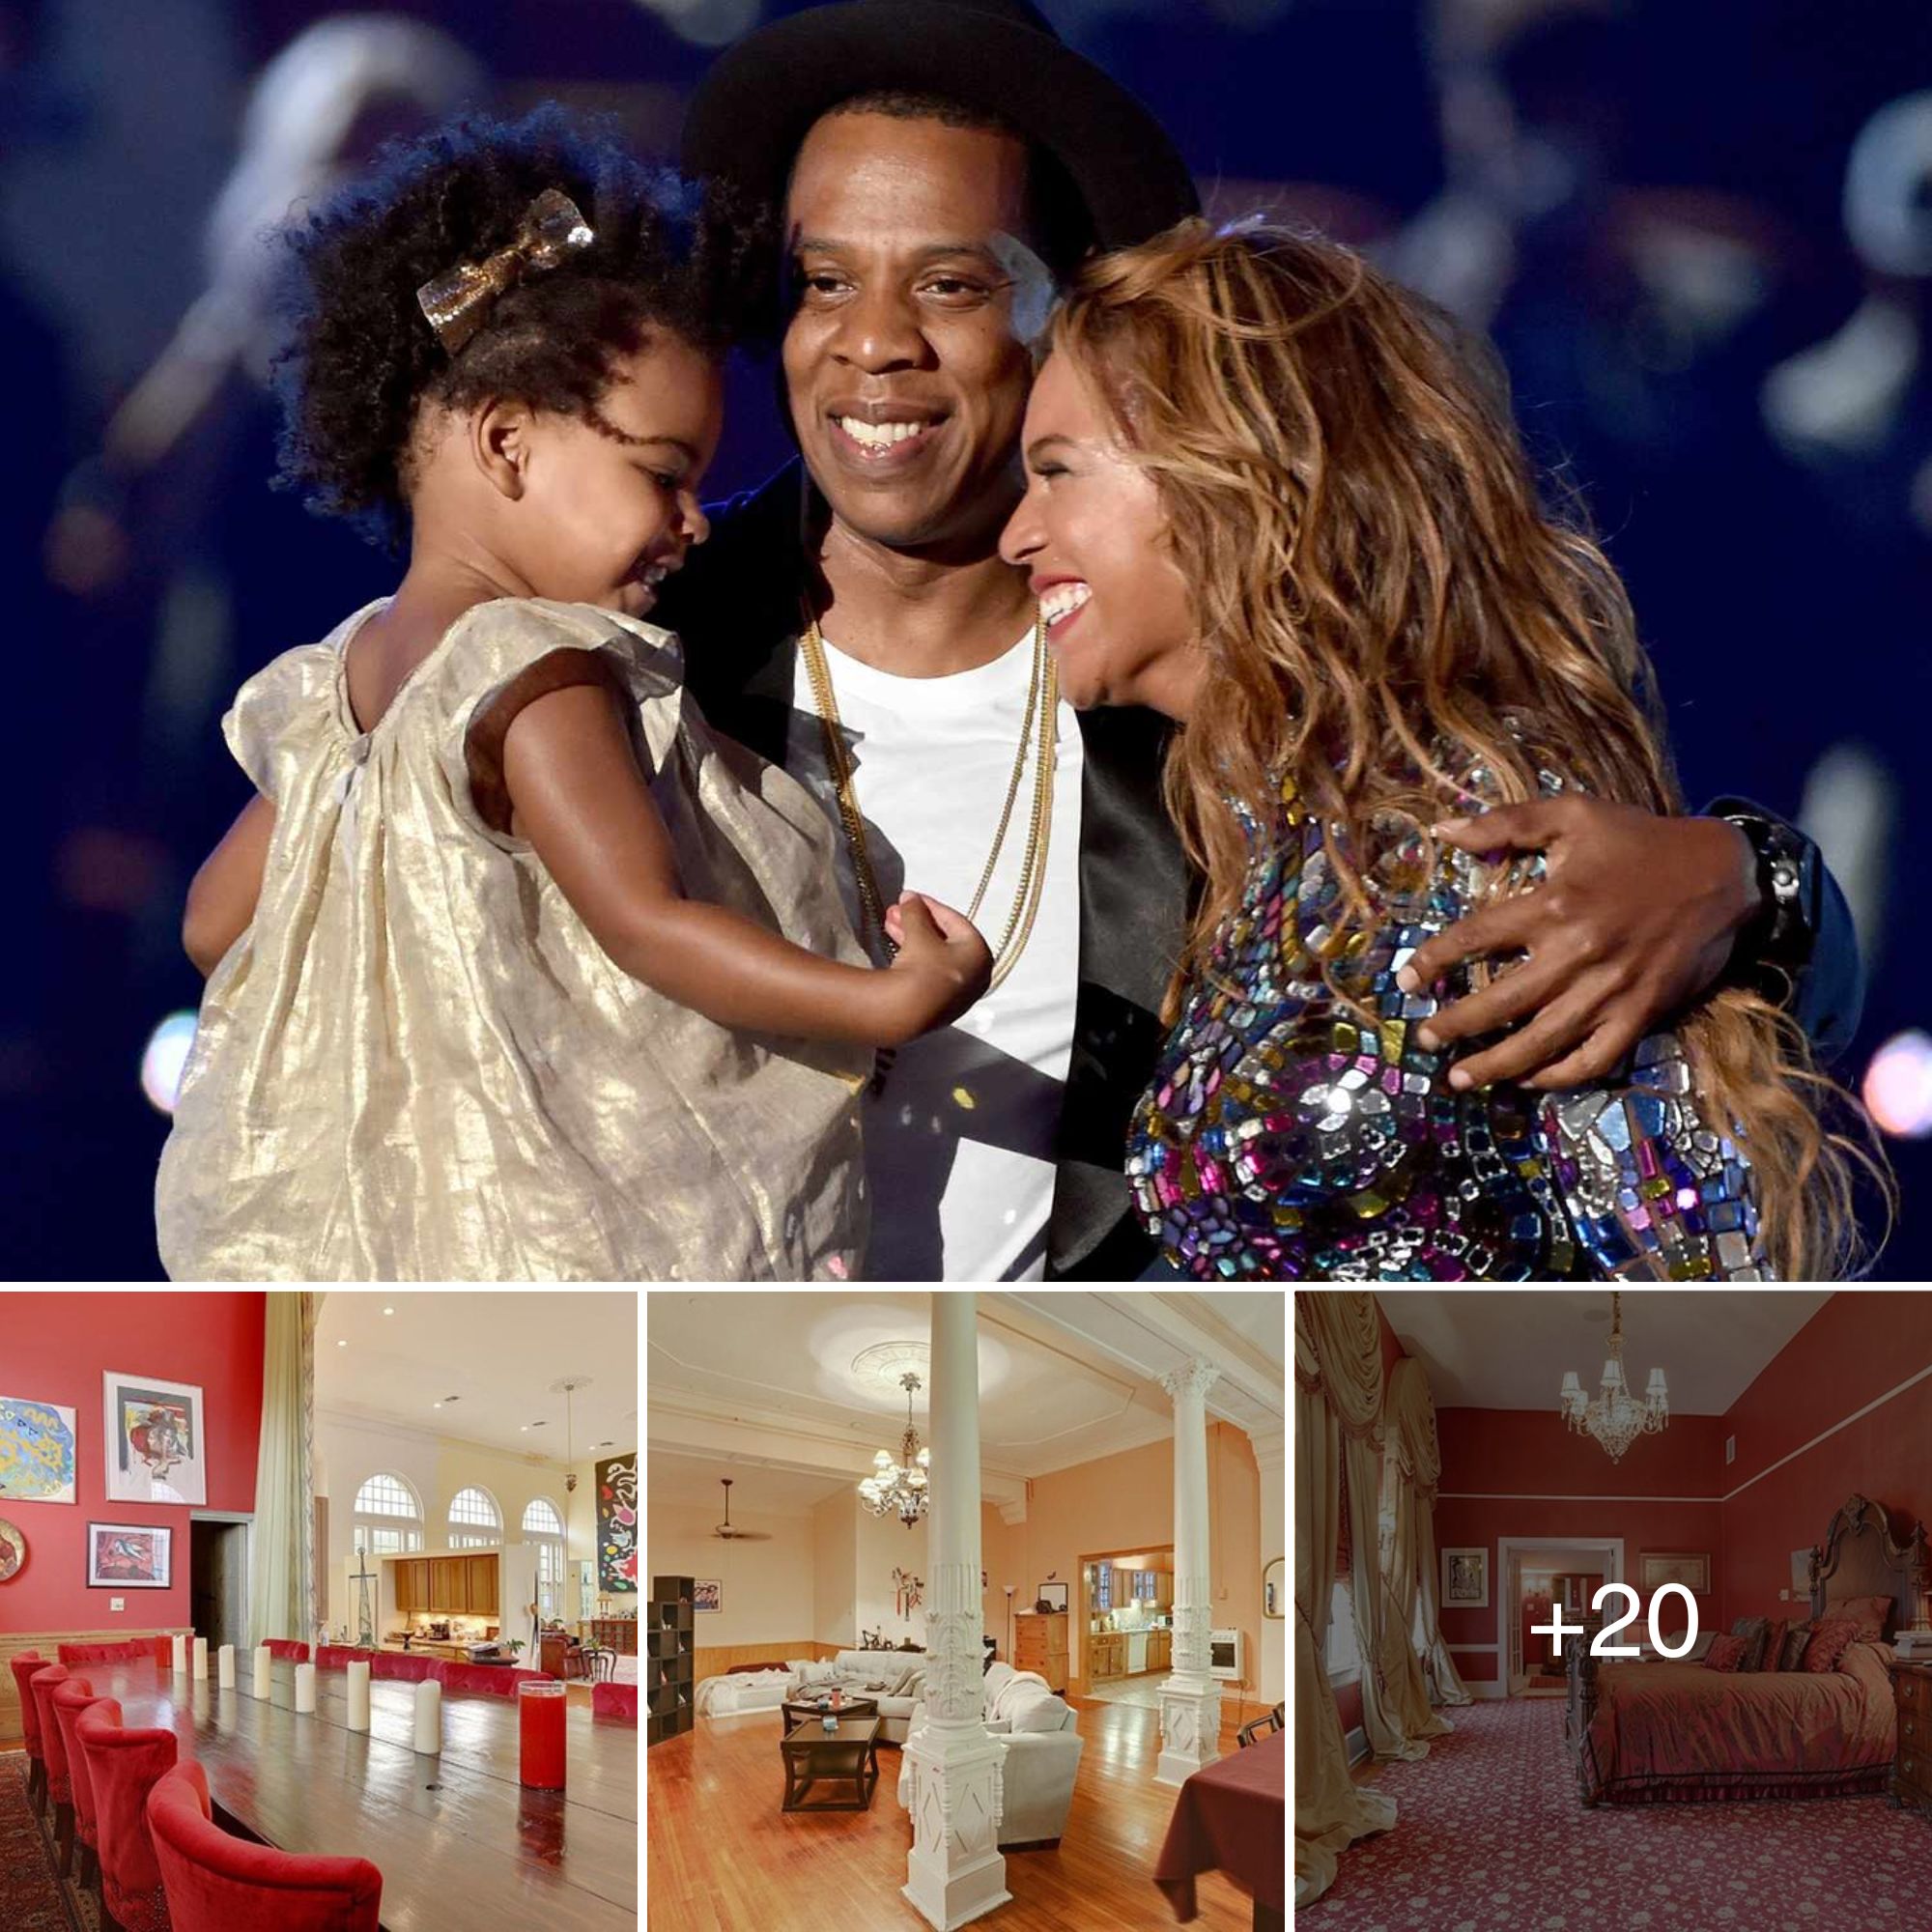 Closeup of the expensive mansion of billionaire couple JayZ and Beyonce